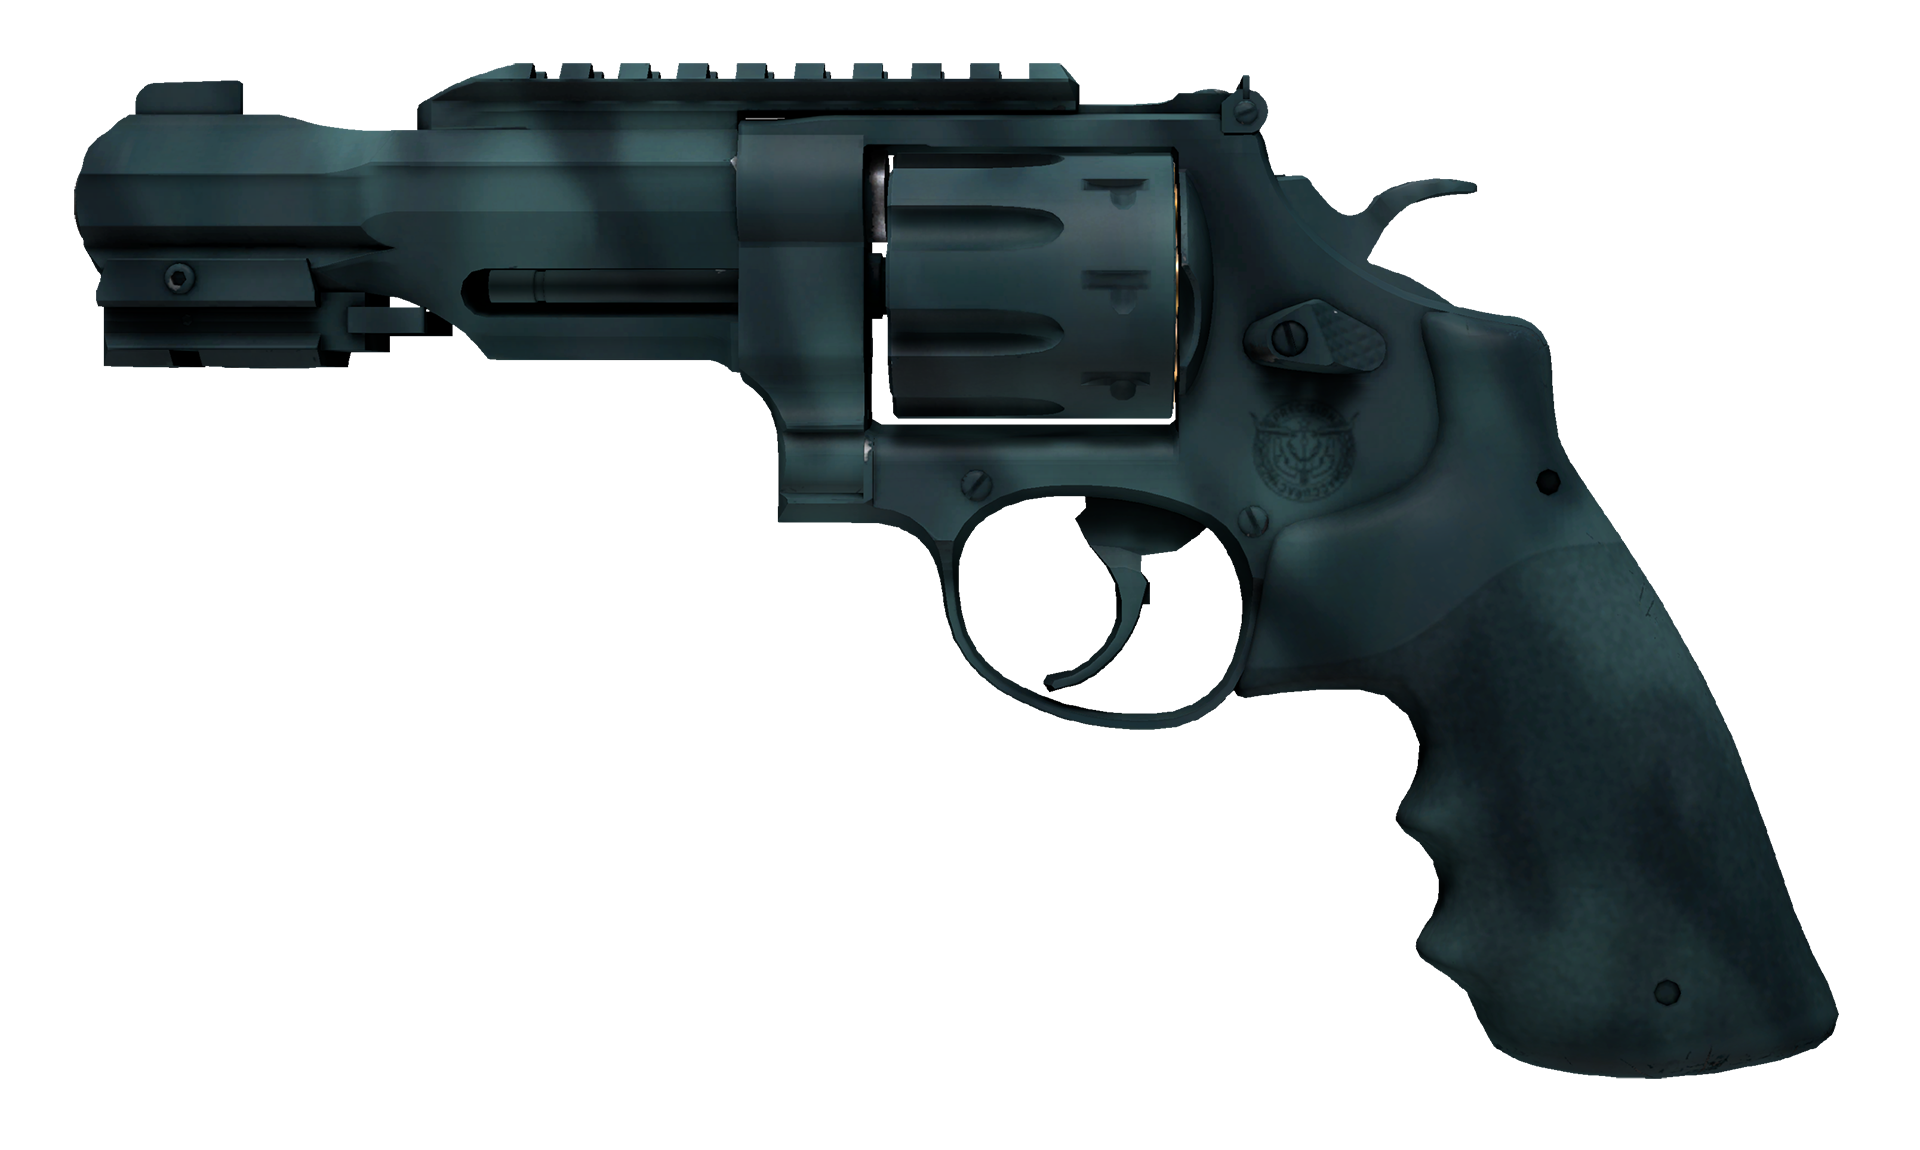 R8 Revolver Canal Spray cs go skin download the last version for ios